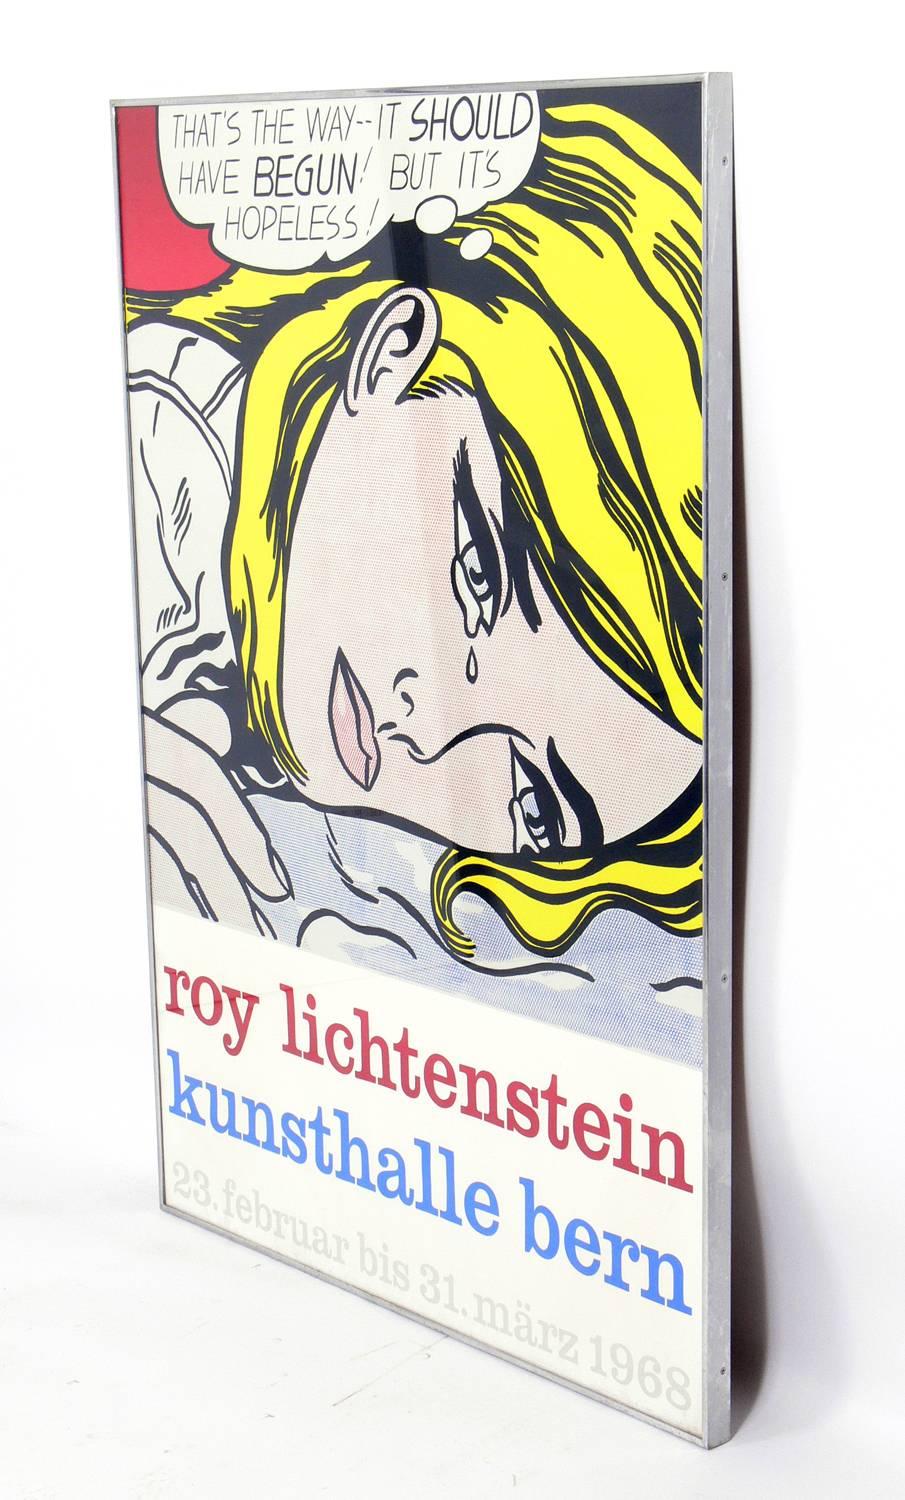 Vintage screenprint poster for Roy Lichtenstein's 1968 exhibition at Kunsthalle, Bern depicting the painting 